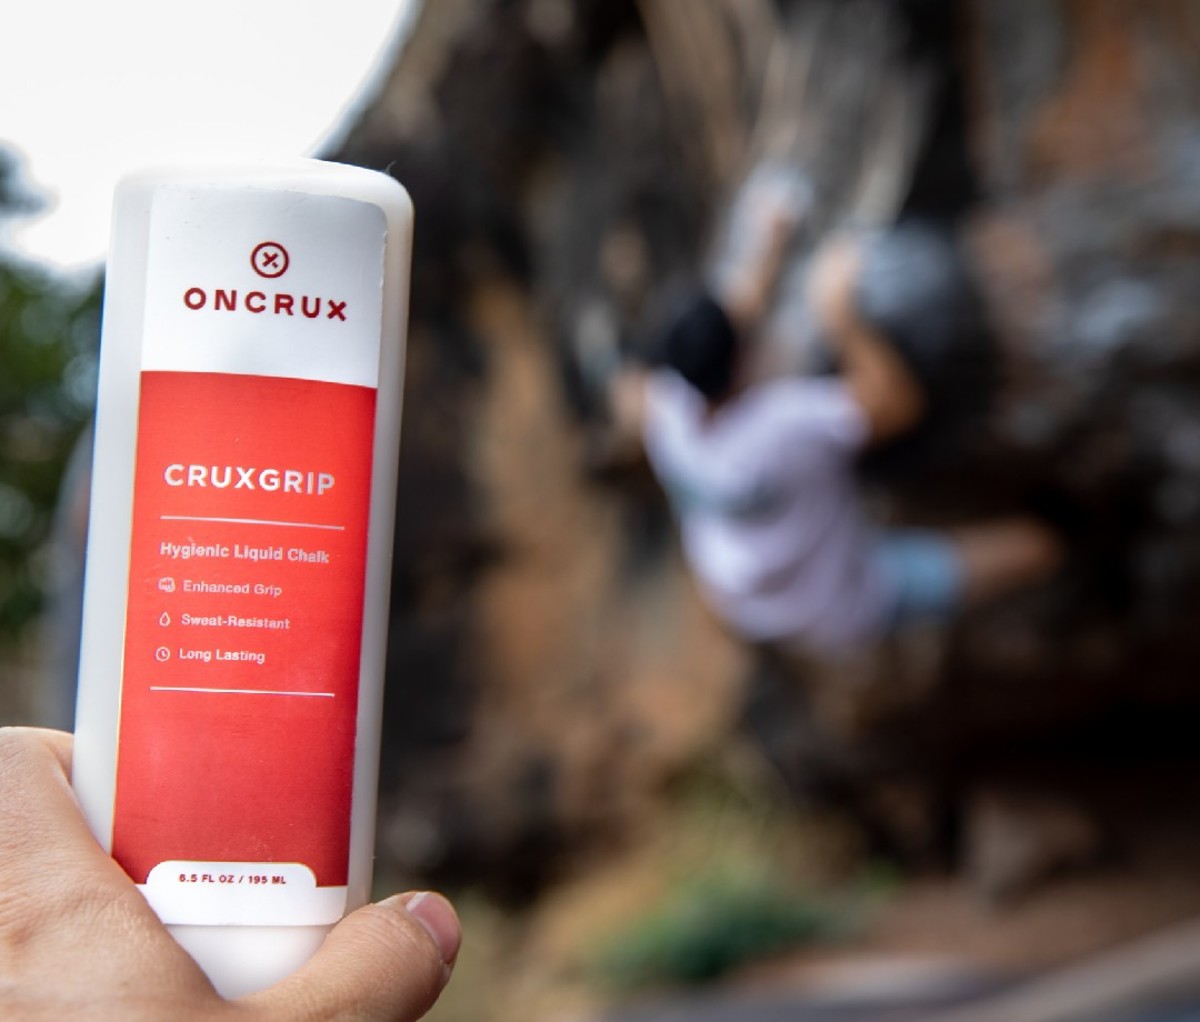 OnCrux Cruxgrip liquid chalk in hand with climber in background